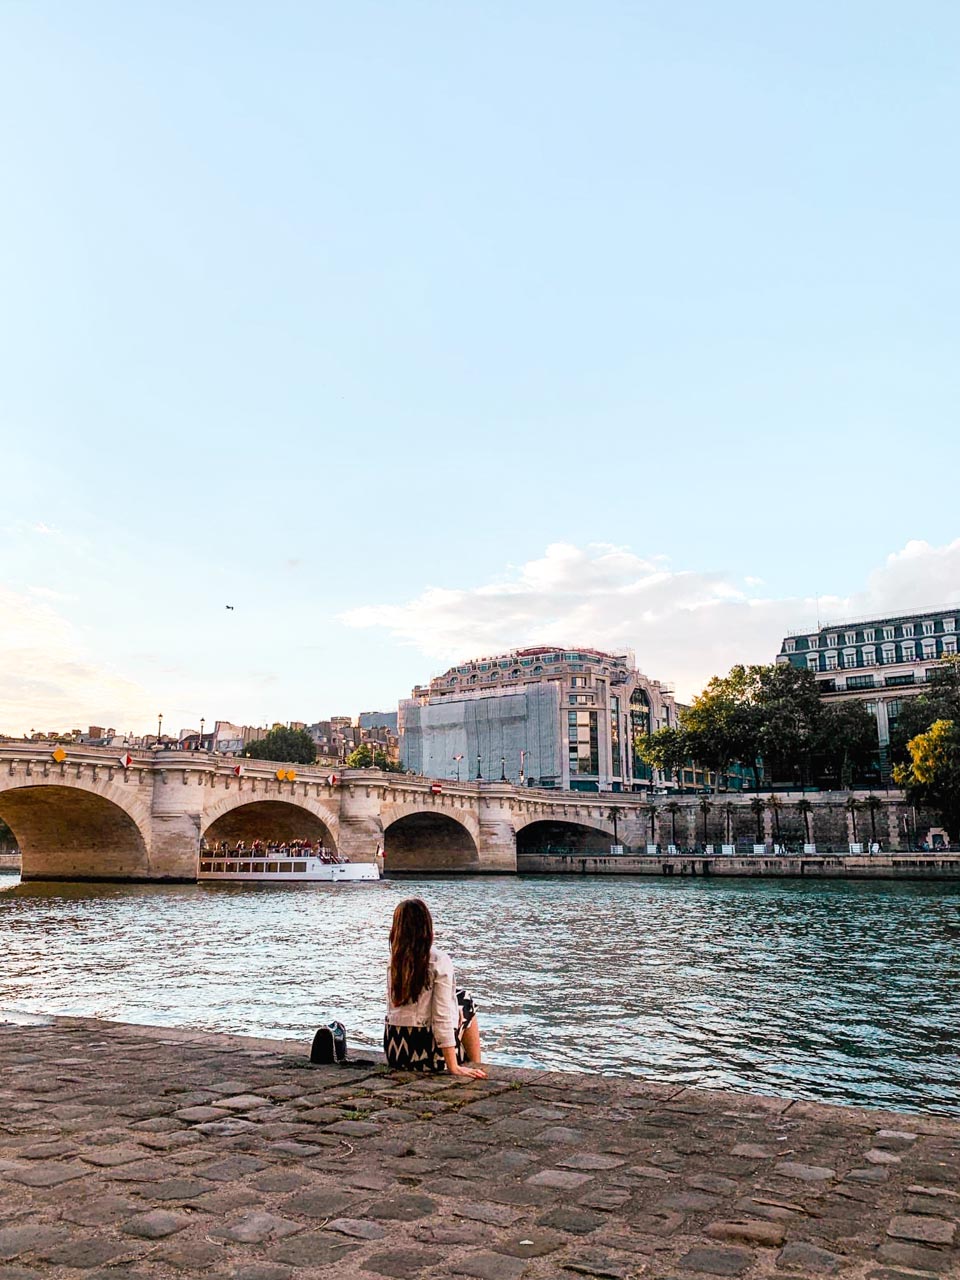 Woman sitting on the bank of the Seine River watching a cruise boat pass under the Pont Neuf